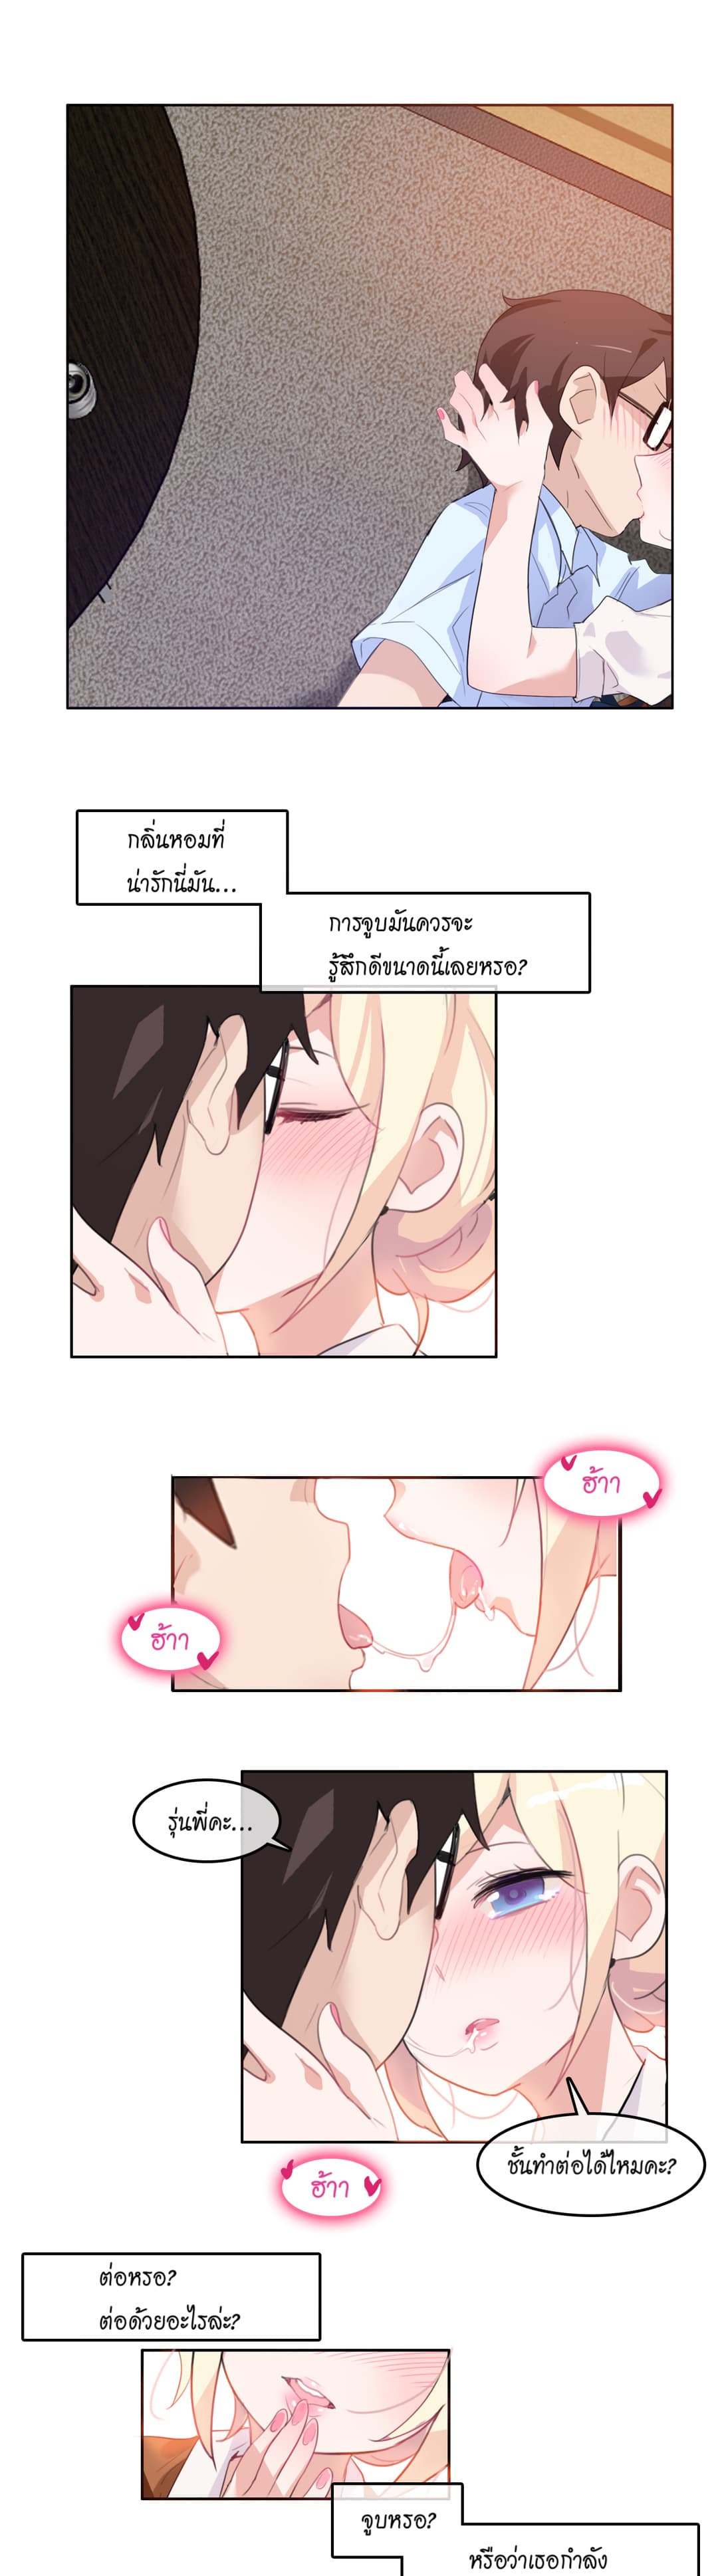 A Pervert’s Daily Life 10 (7)